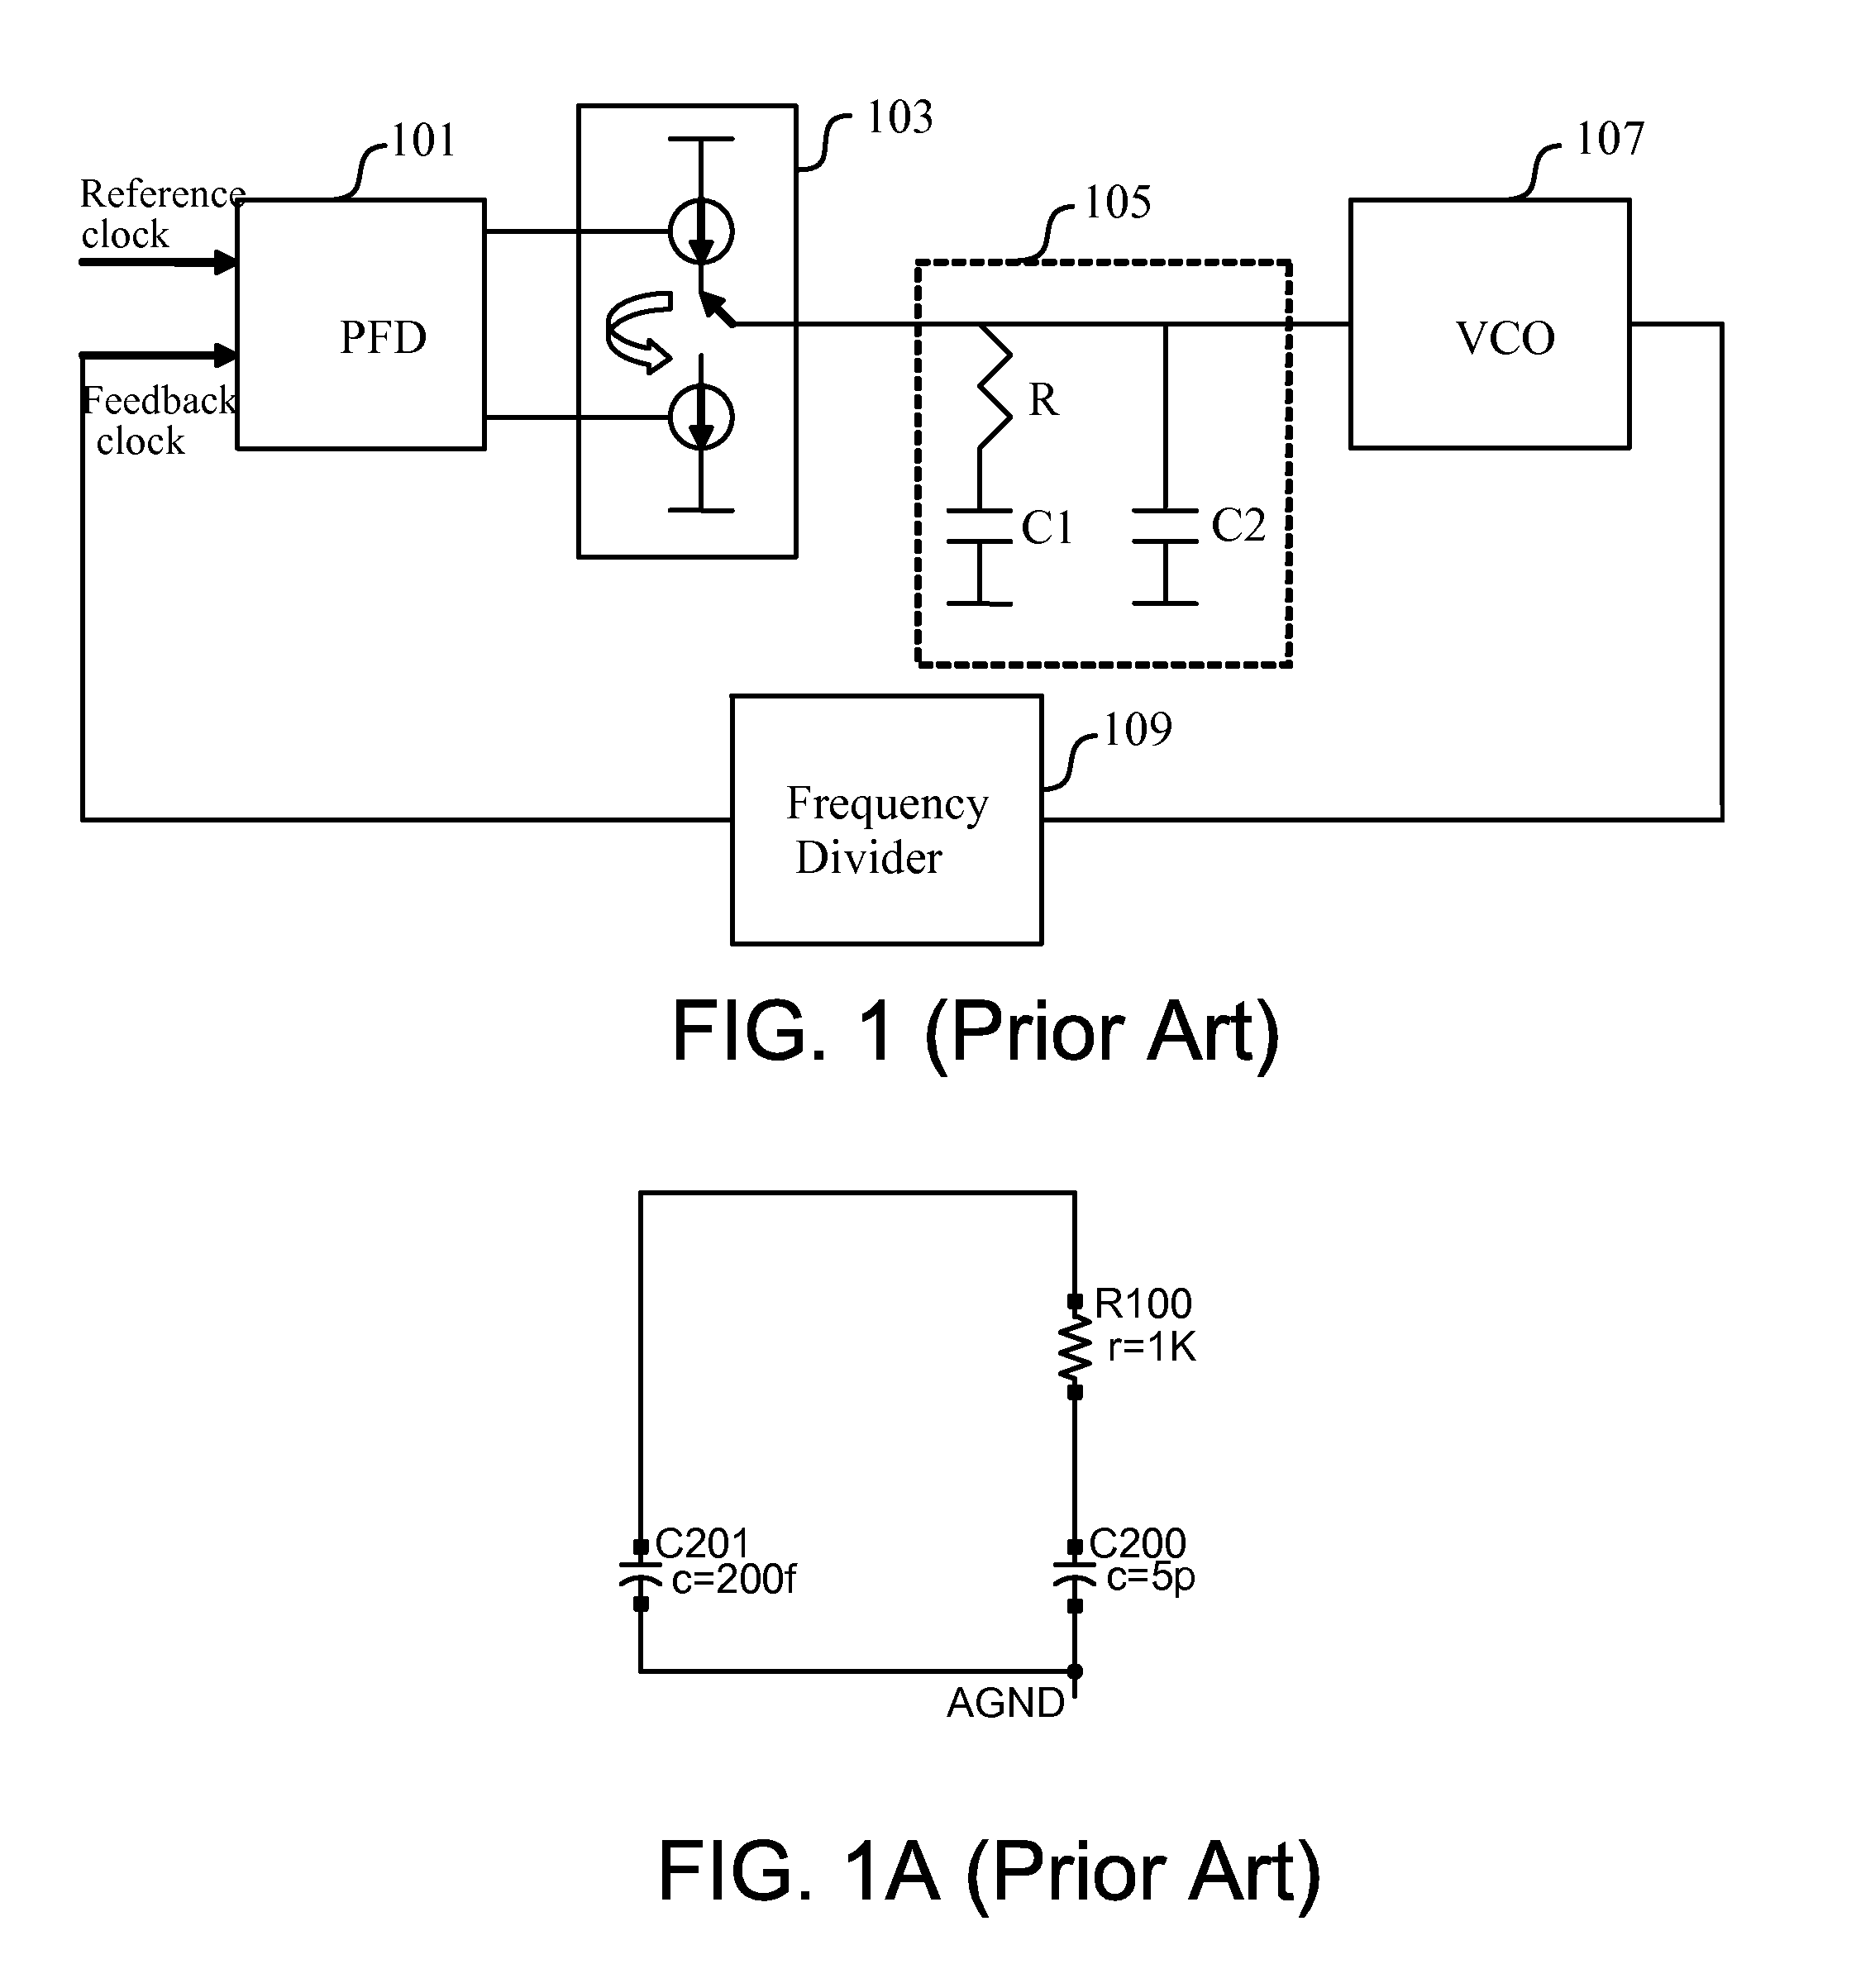 Adjustable pole and zero location for a second order low pass filter used in a phase lock loop circuit